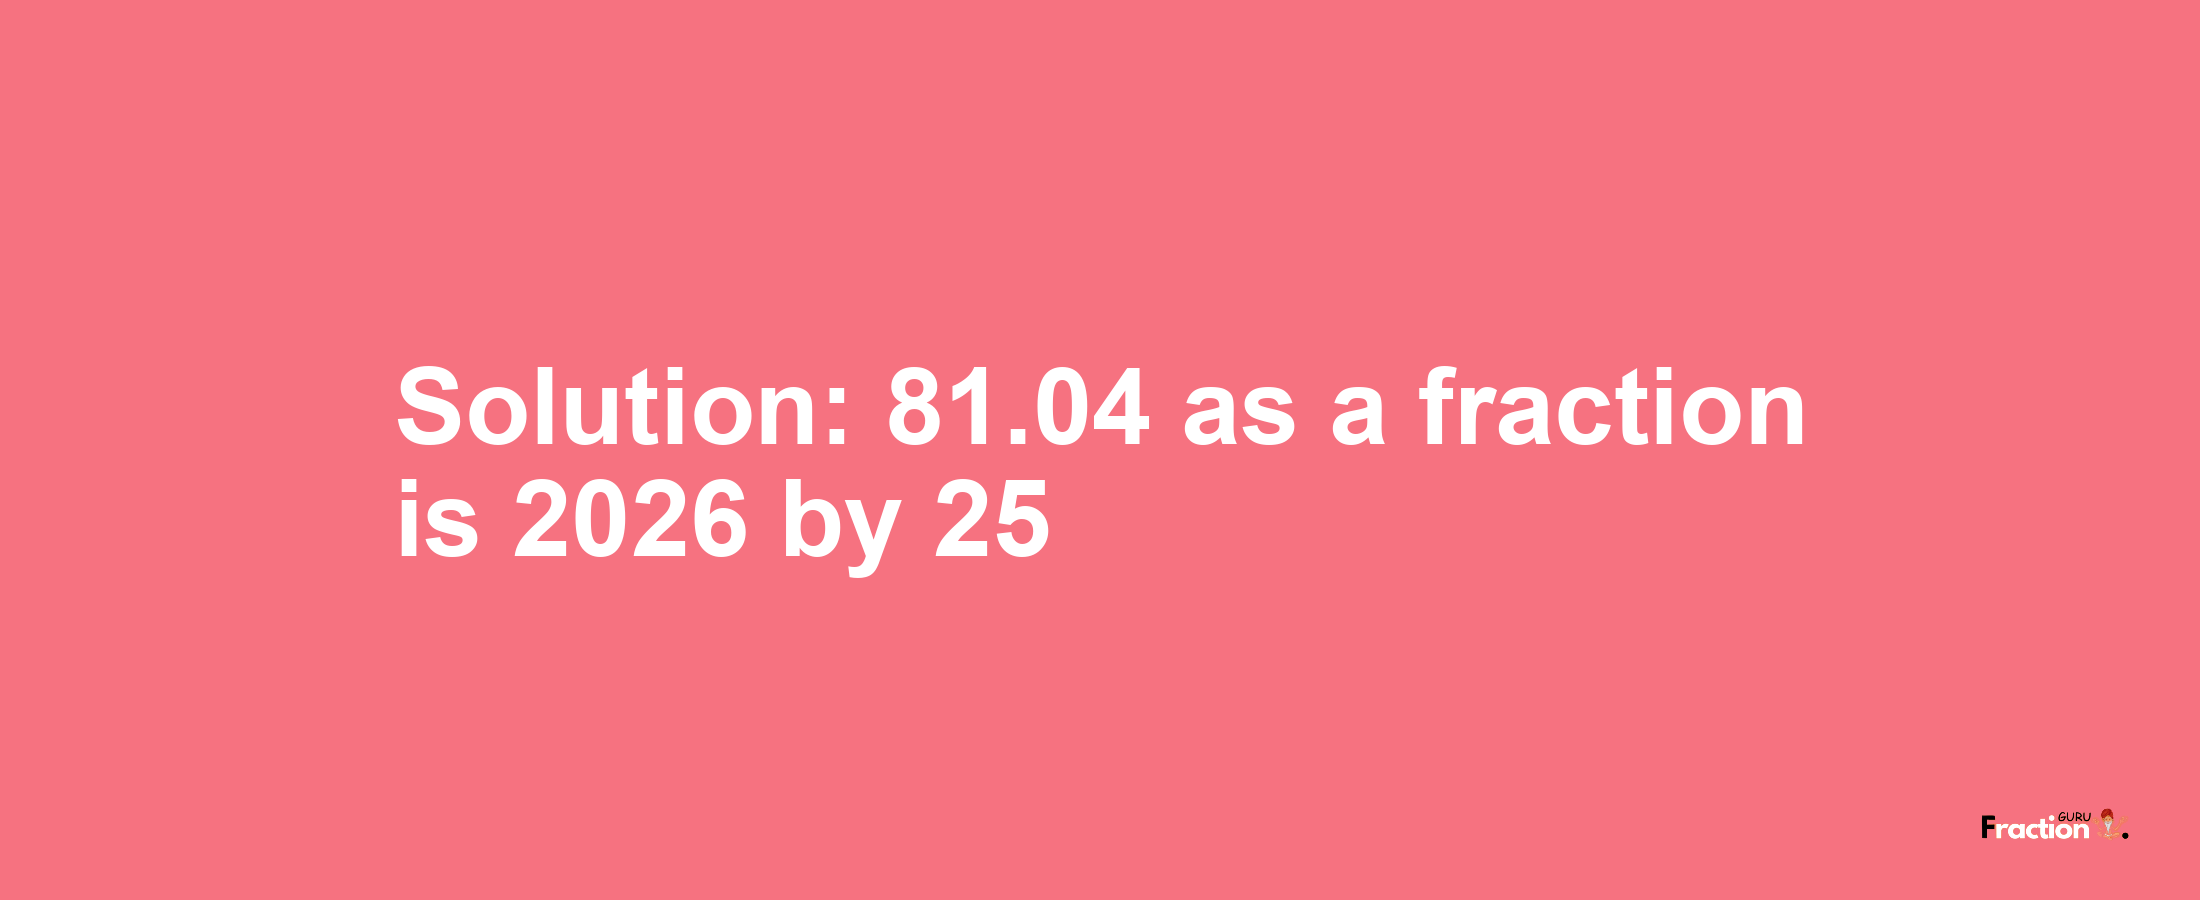 Solution:81.04 as a fraction is 2026/25